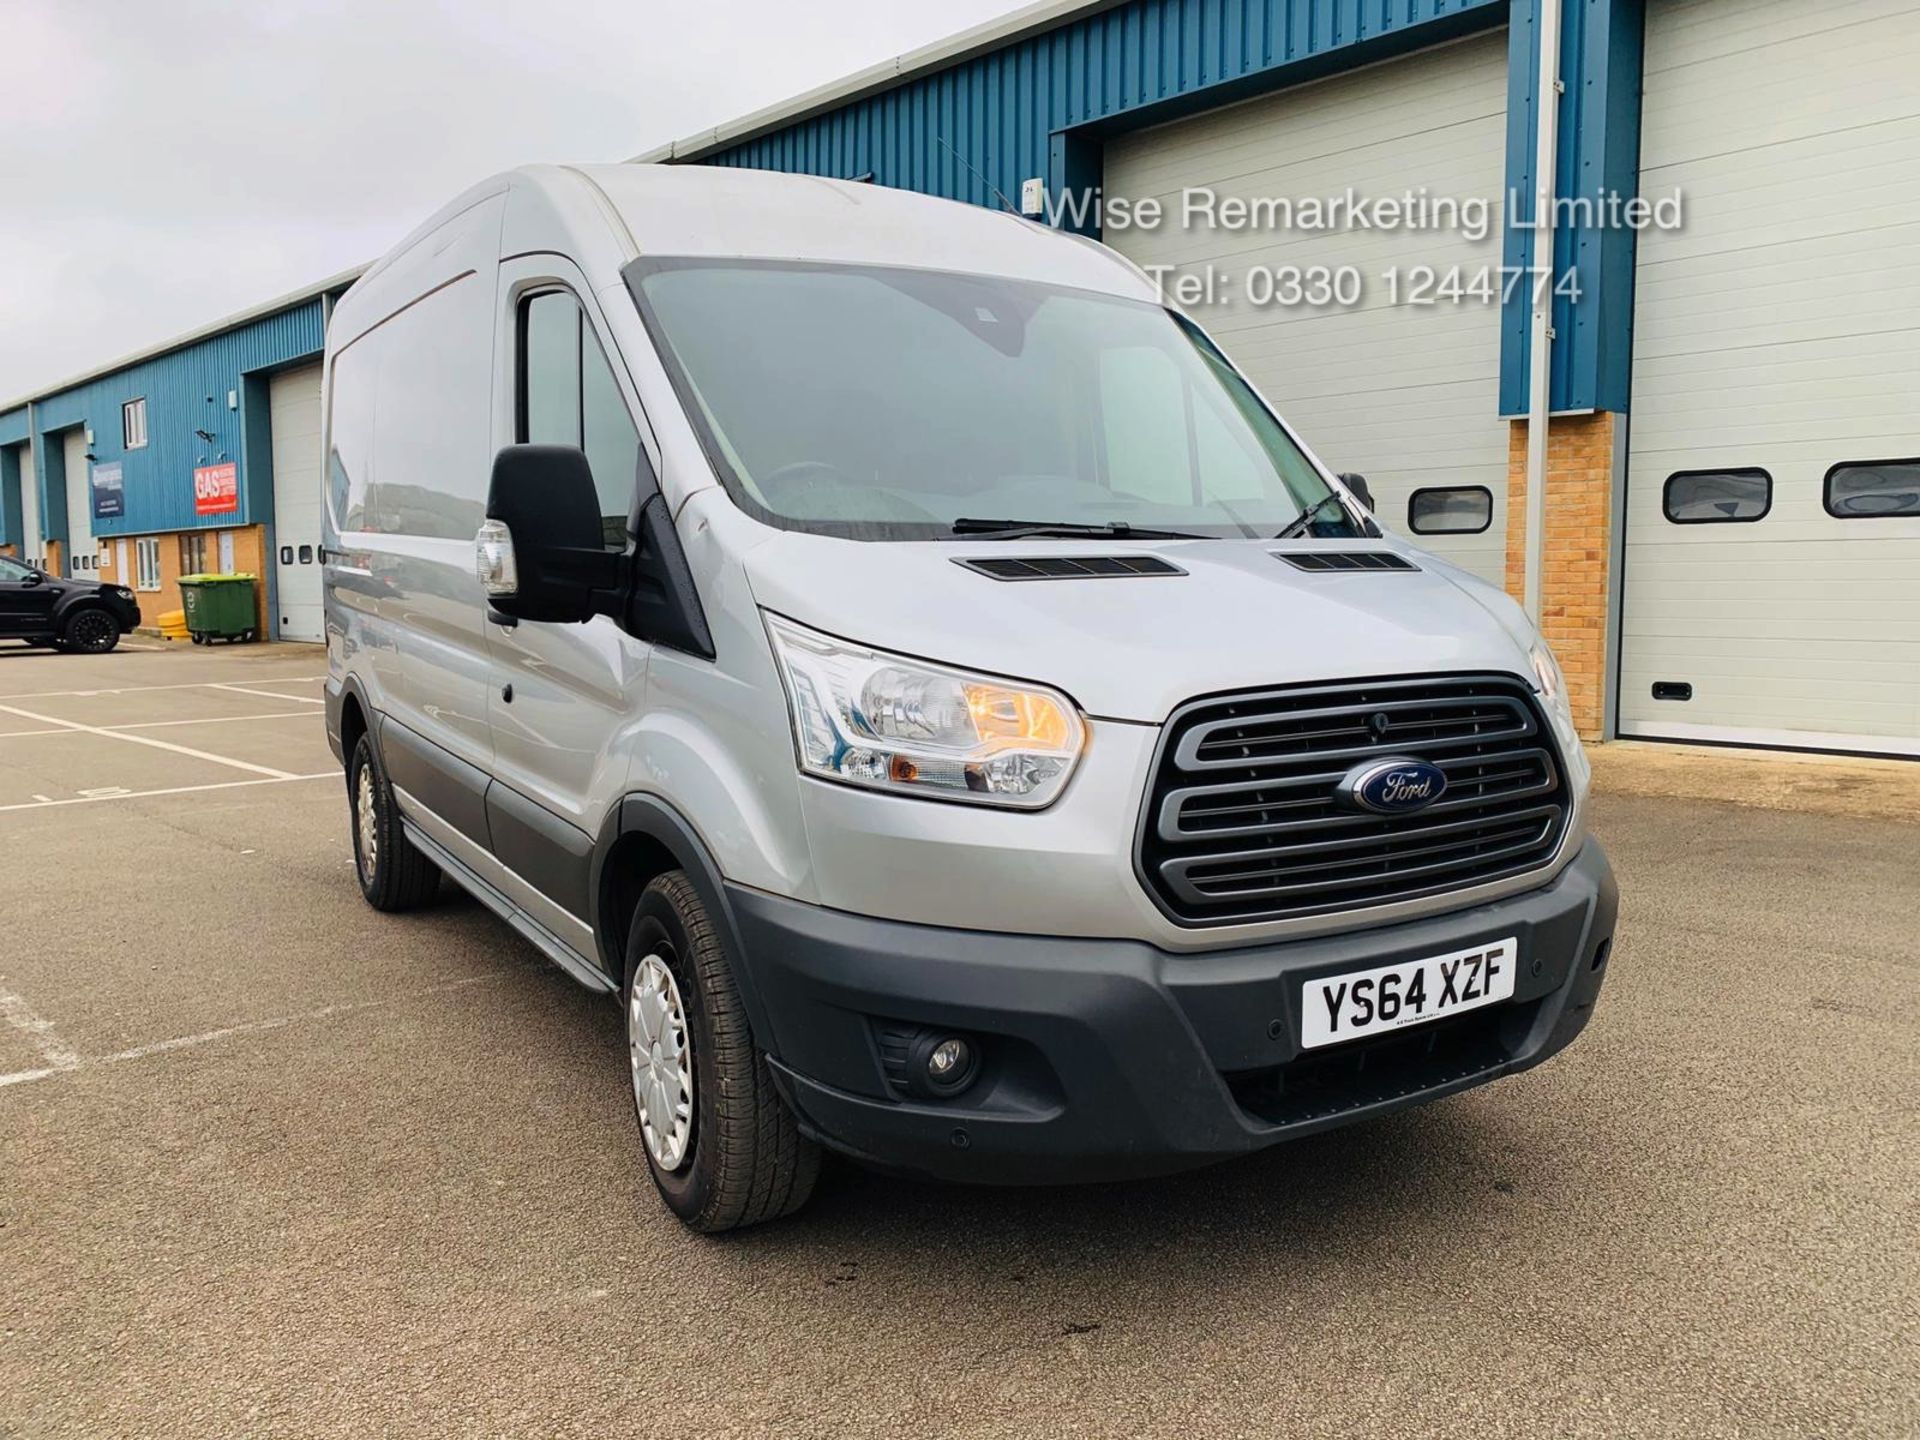 Ford Transit 350 2.2 TDCI Trend Van - 2015 Reg - Silver - 6 Speed - Ply Lined - Image 7 of 20